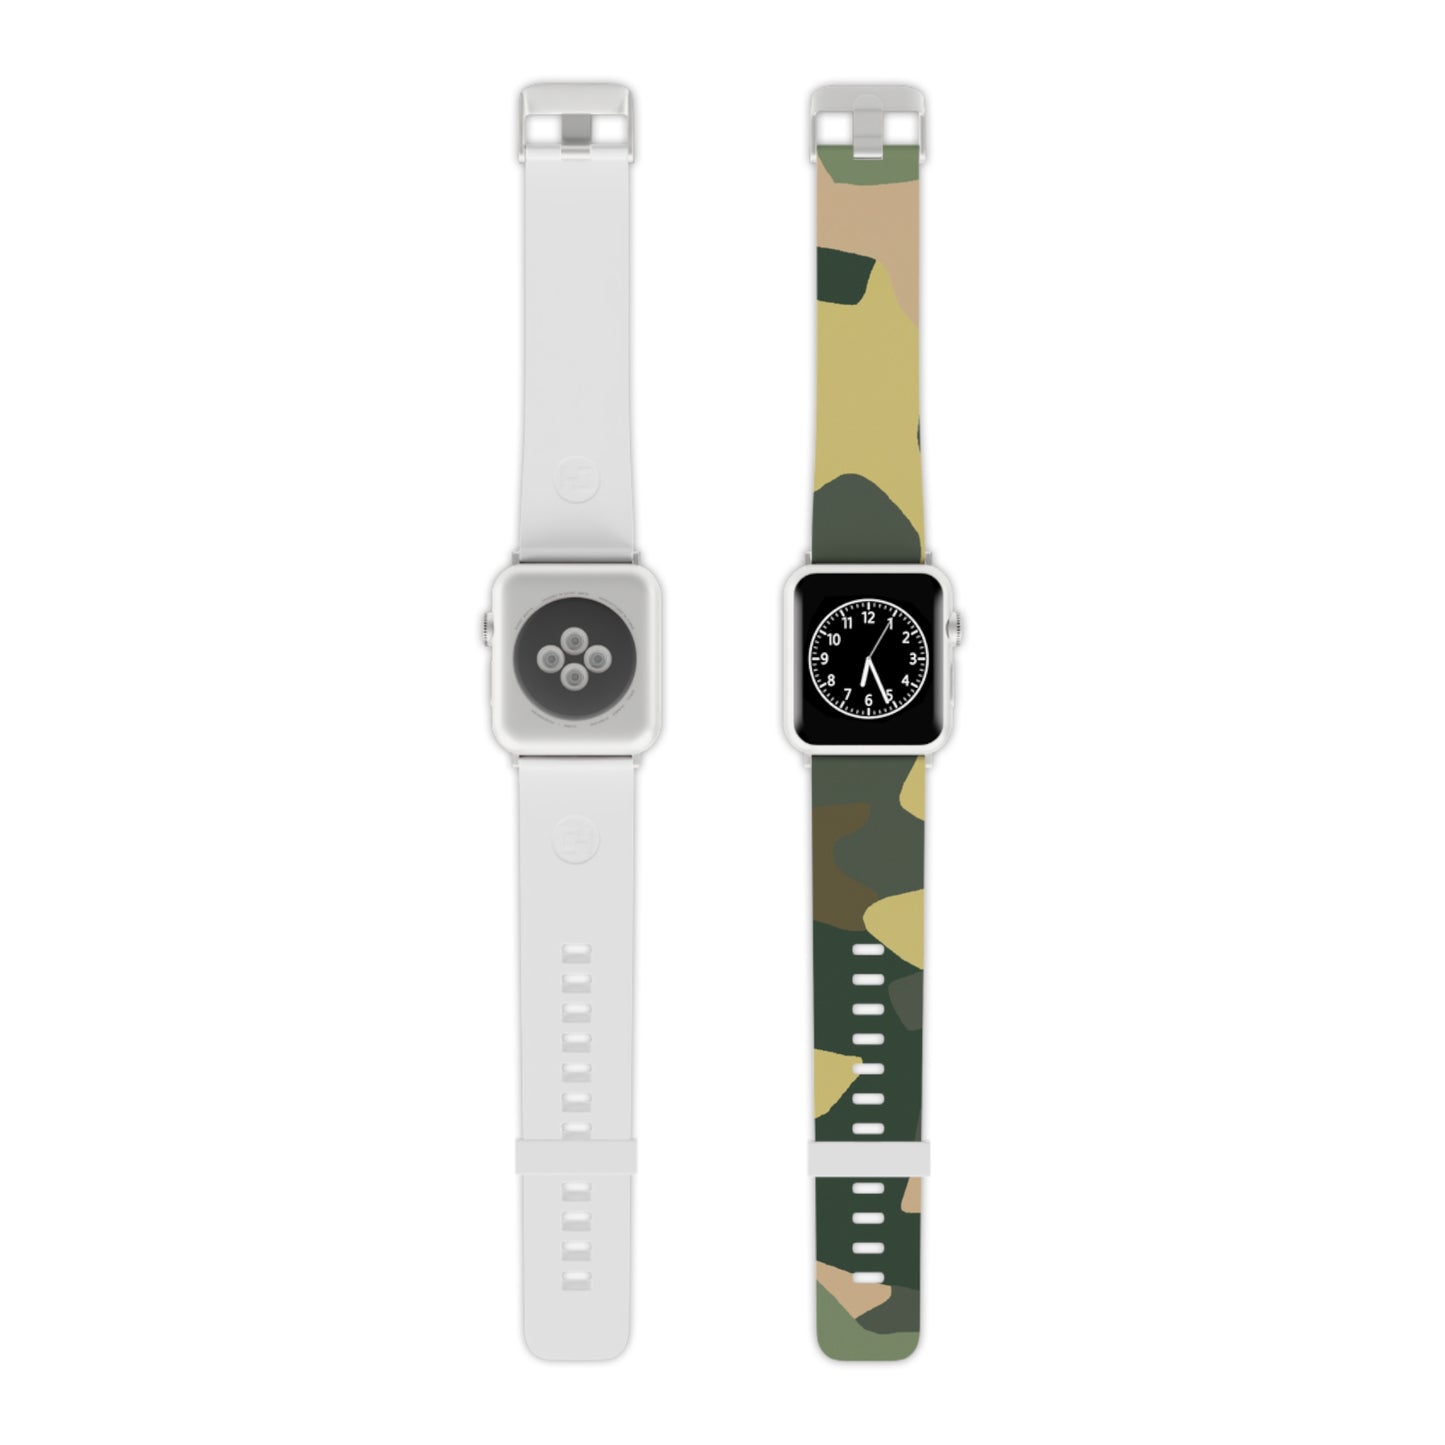 Ensign Ebba Torgesson - Camouflage Apple Wrist Watch Band